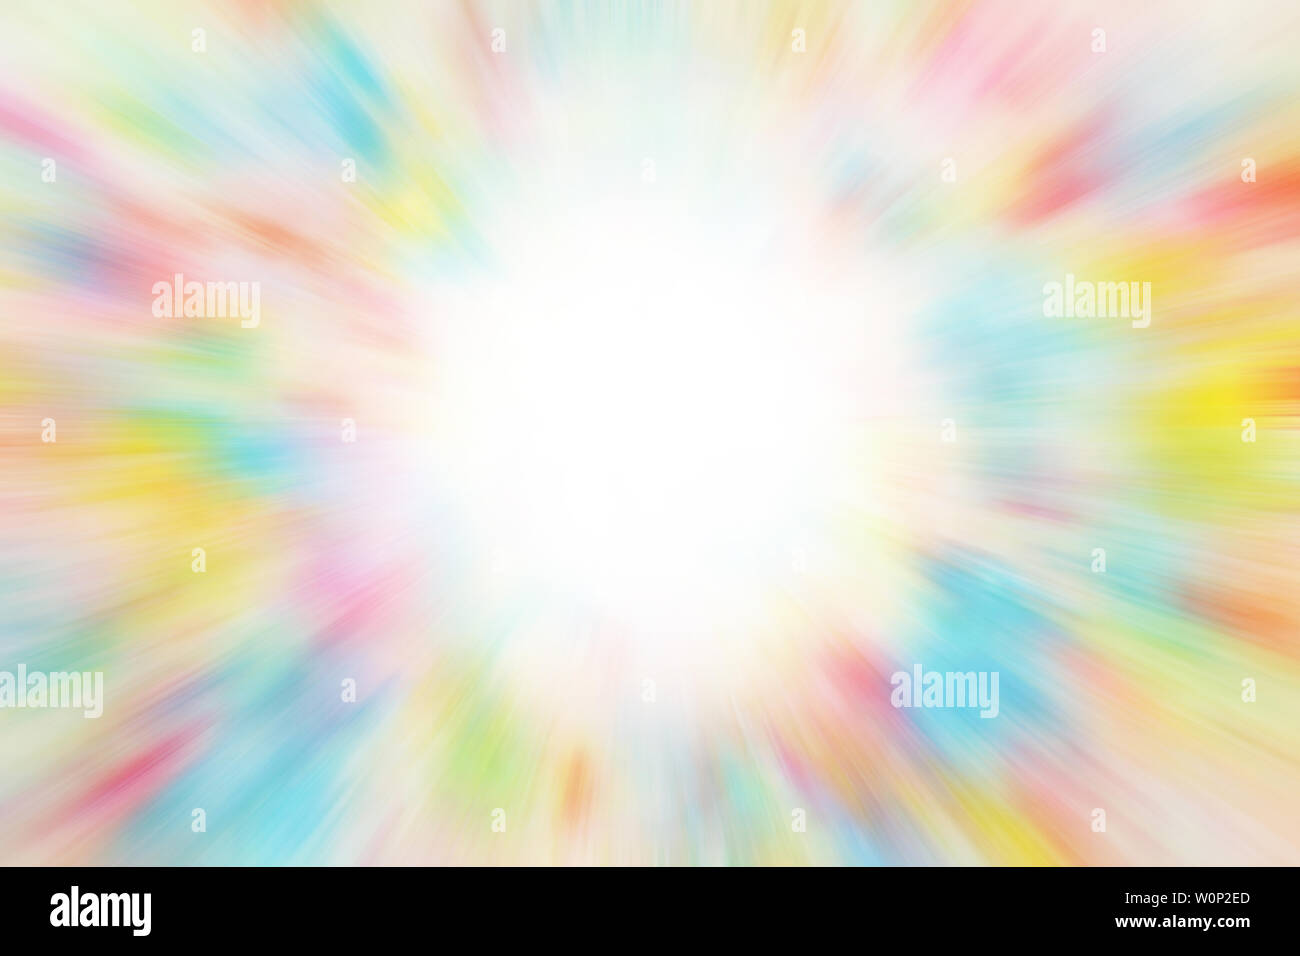 https://c8.alamy.com/comp/W0P2ED/colorful-rays-of-light-background-or-rainbow-line-texture-abstract-W0P2ED.jpg